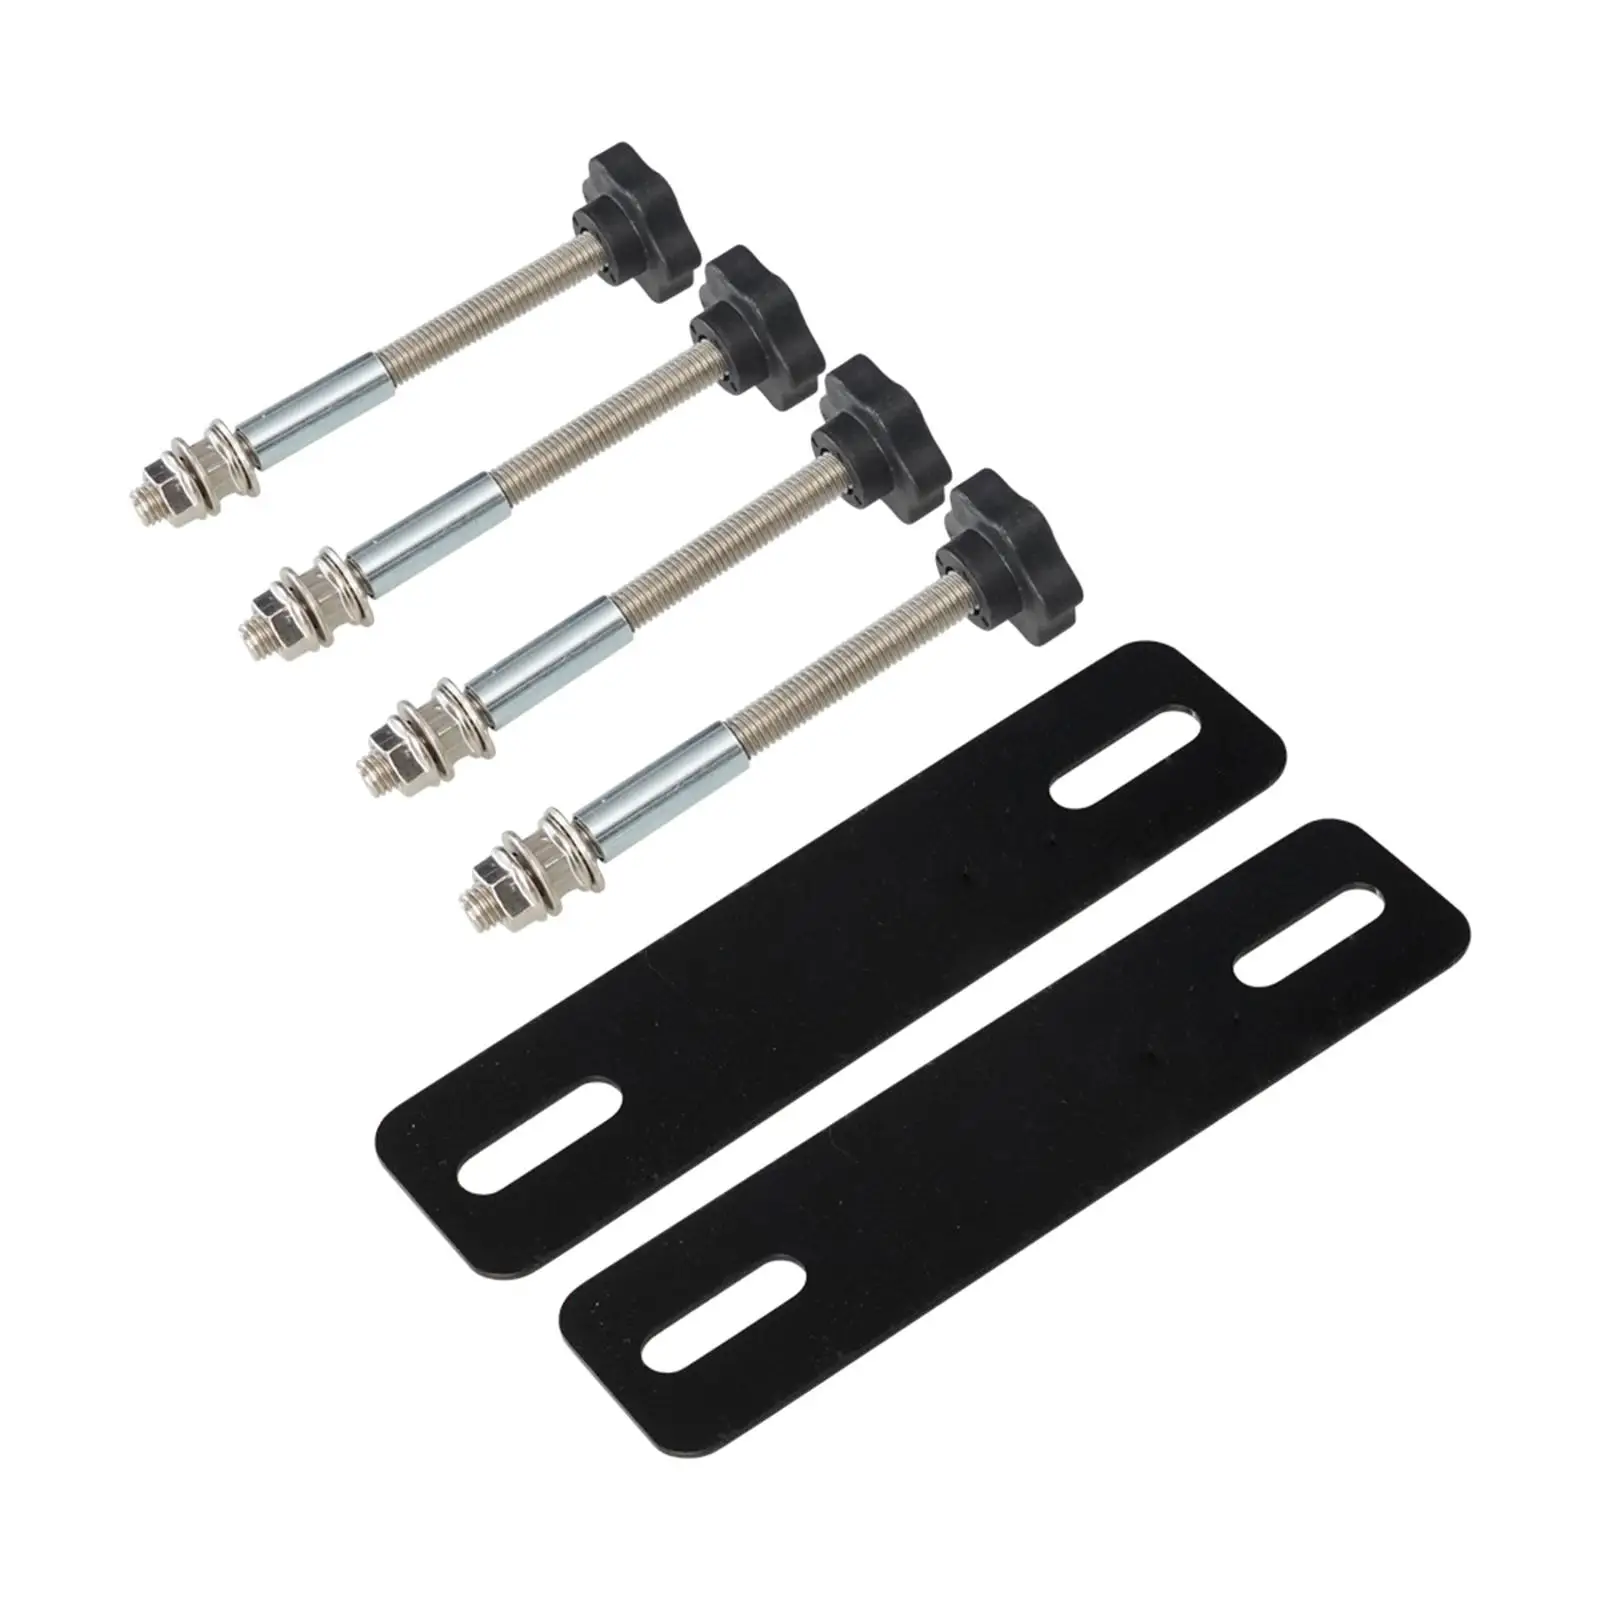 Mounting Pins Kits Professional Accessory Repair Parts for Traction Boards